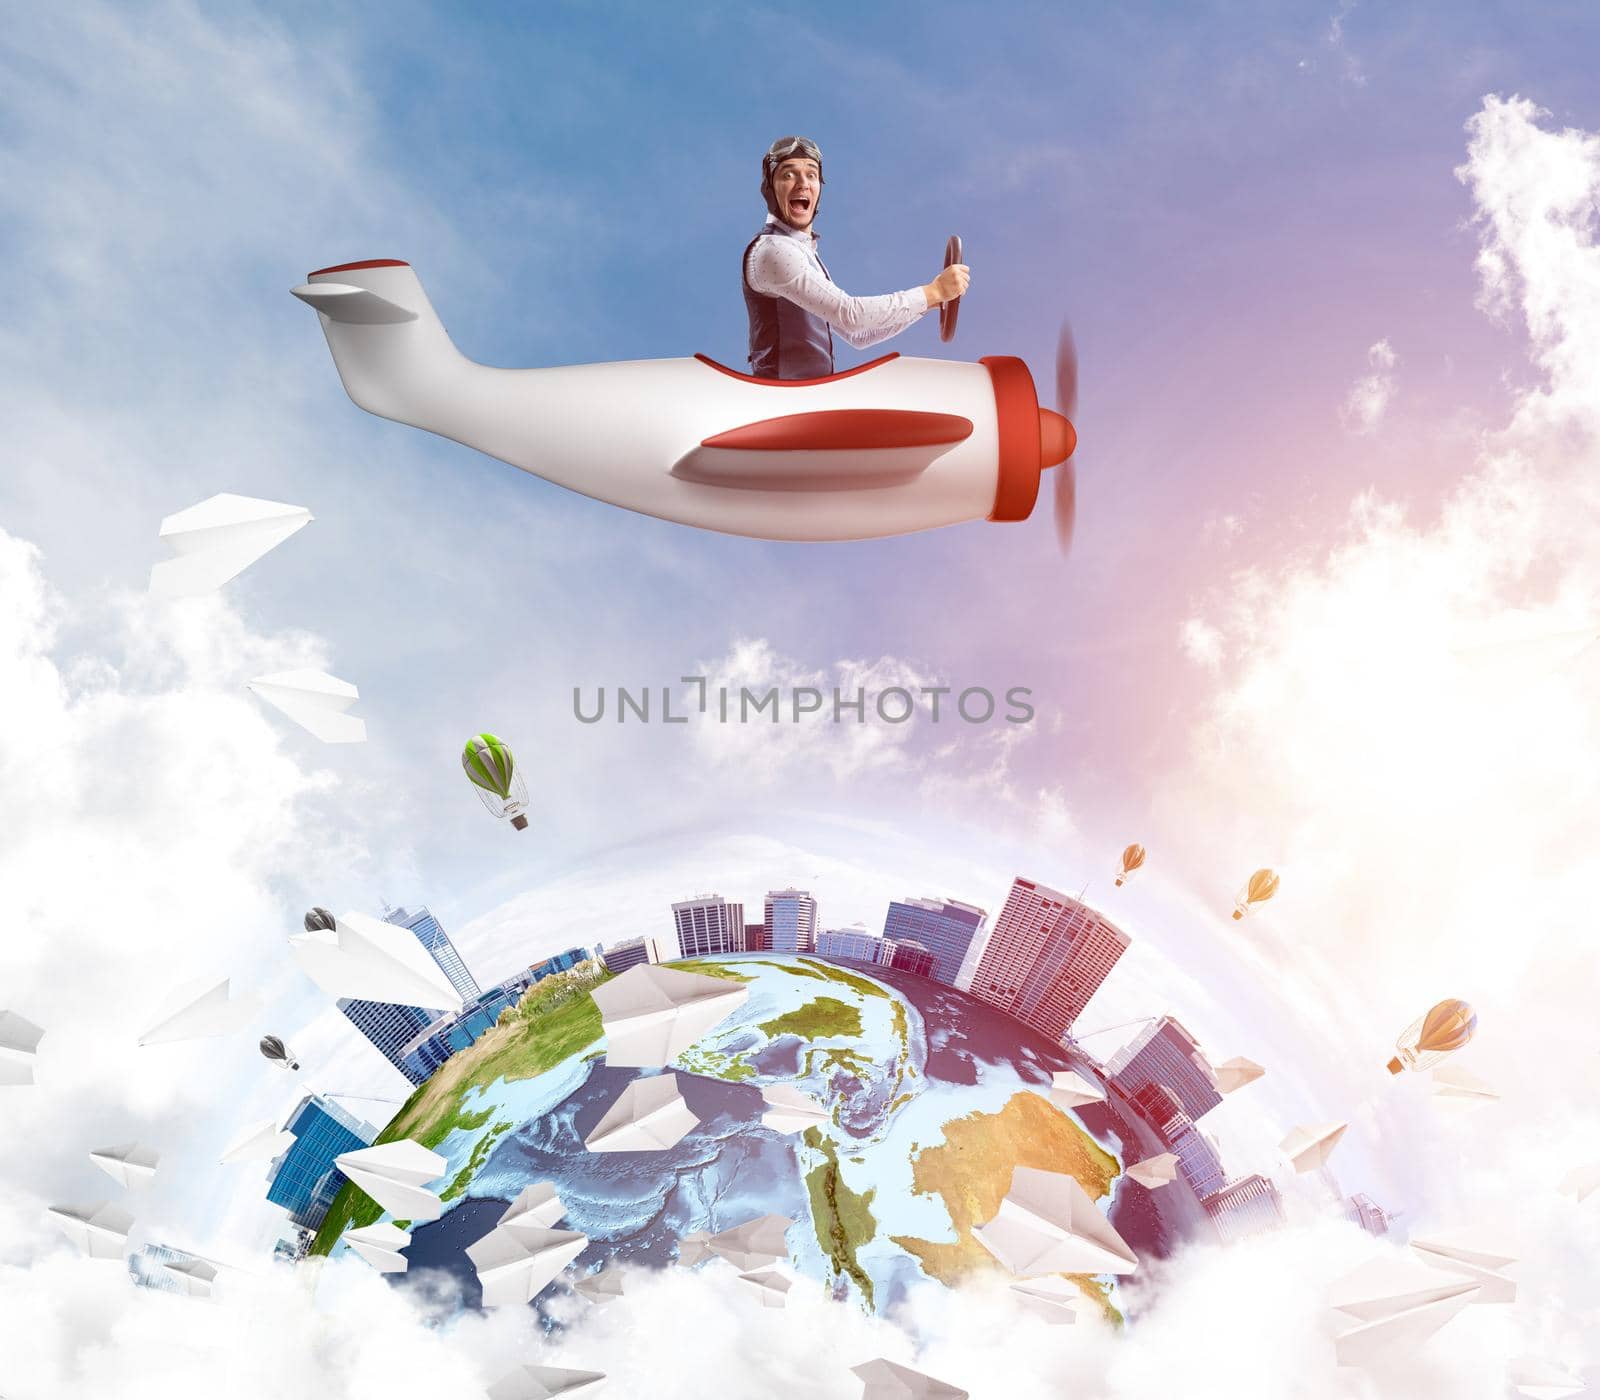 Man in aviator hat with goggles driving propeller plane. Earth globe with high modern buildings. Funny man having fun in small airplane. Blue cloudy sky with flying hot air balloons and paper planes